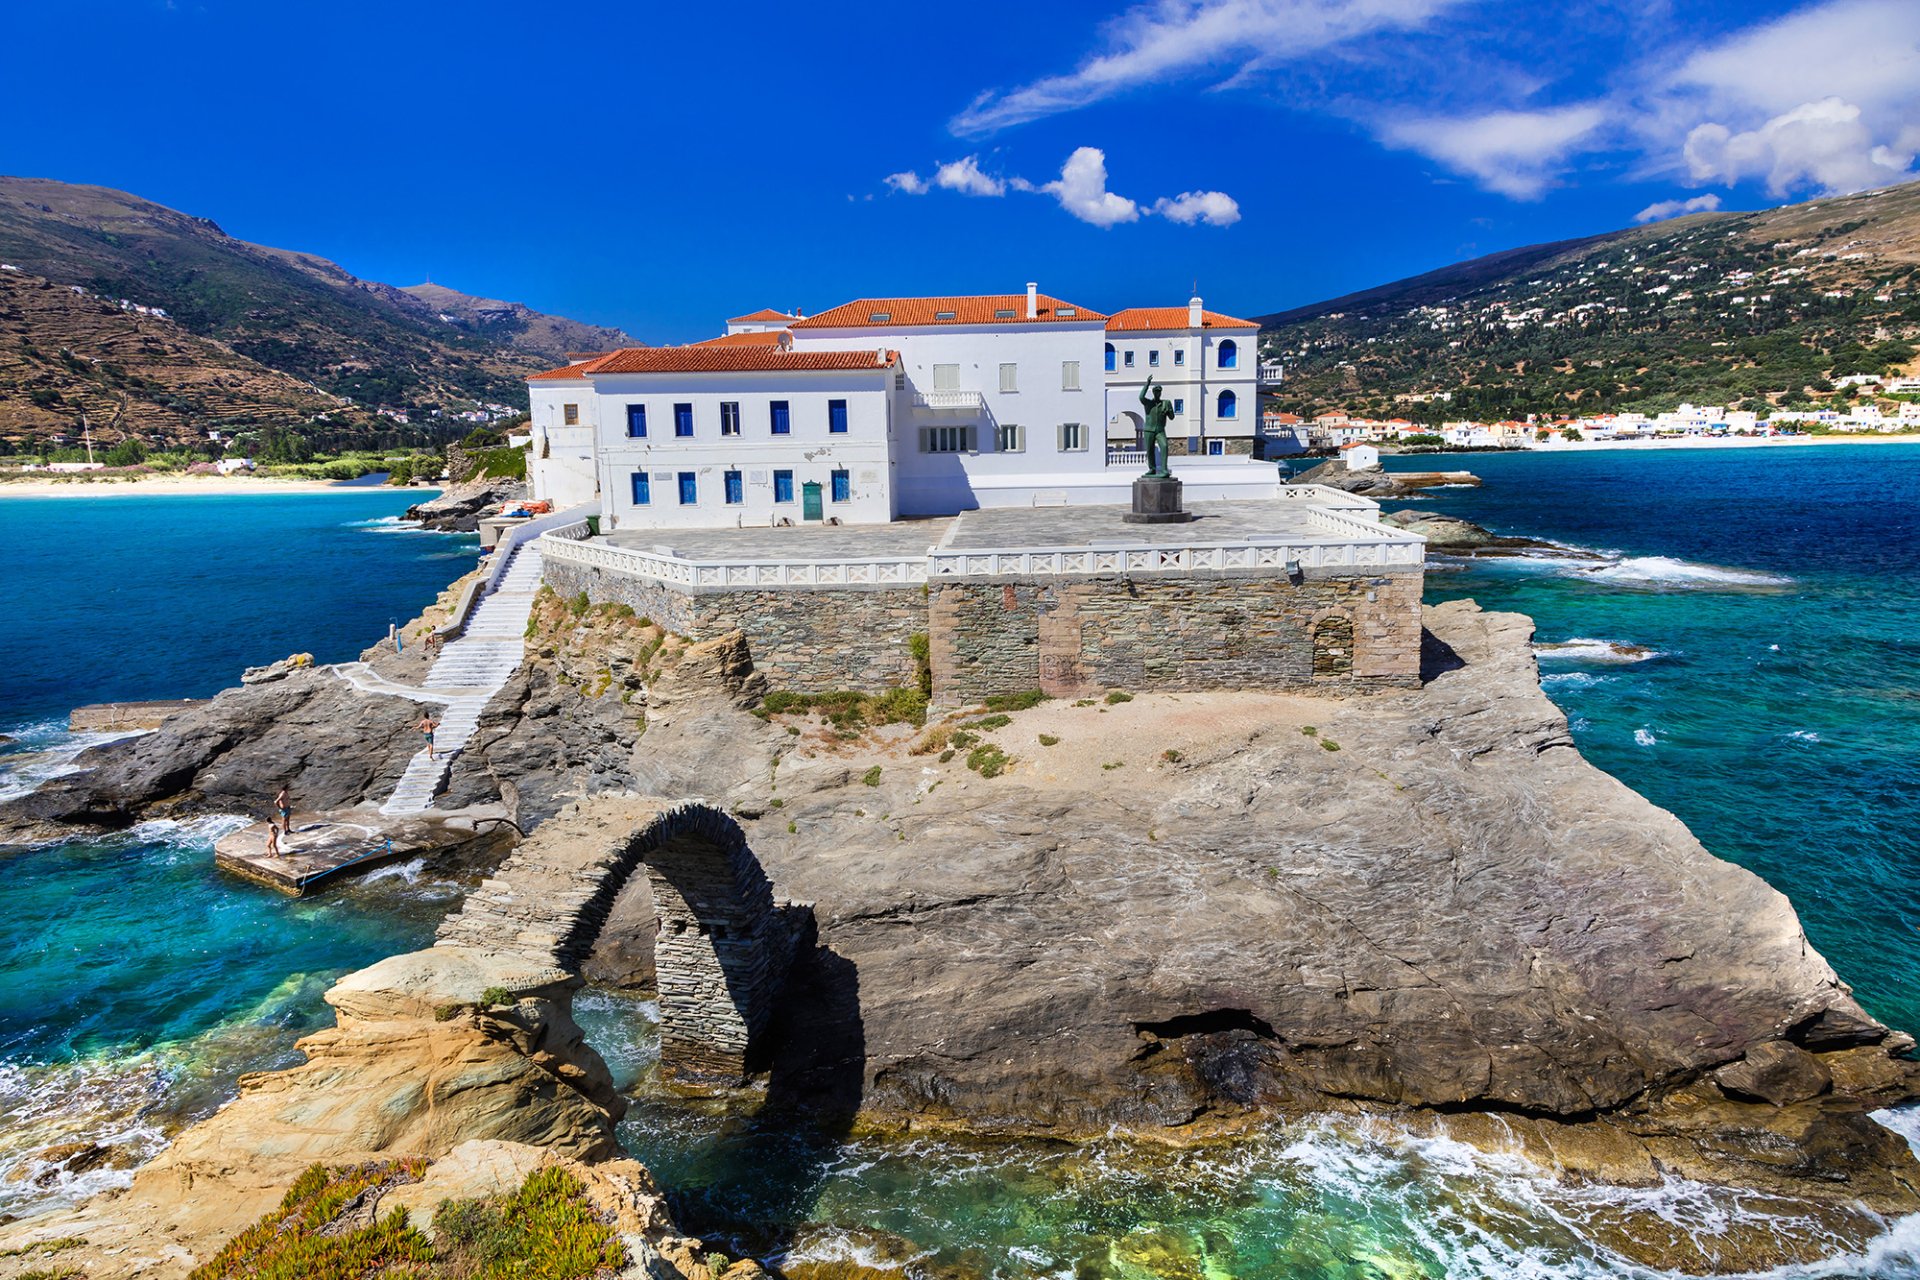 Andros Maritime Museum, Andros Island, Greece